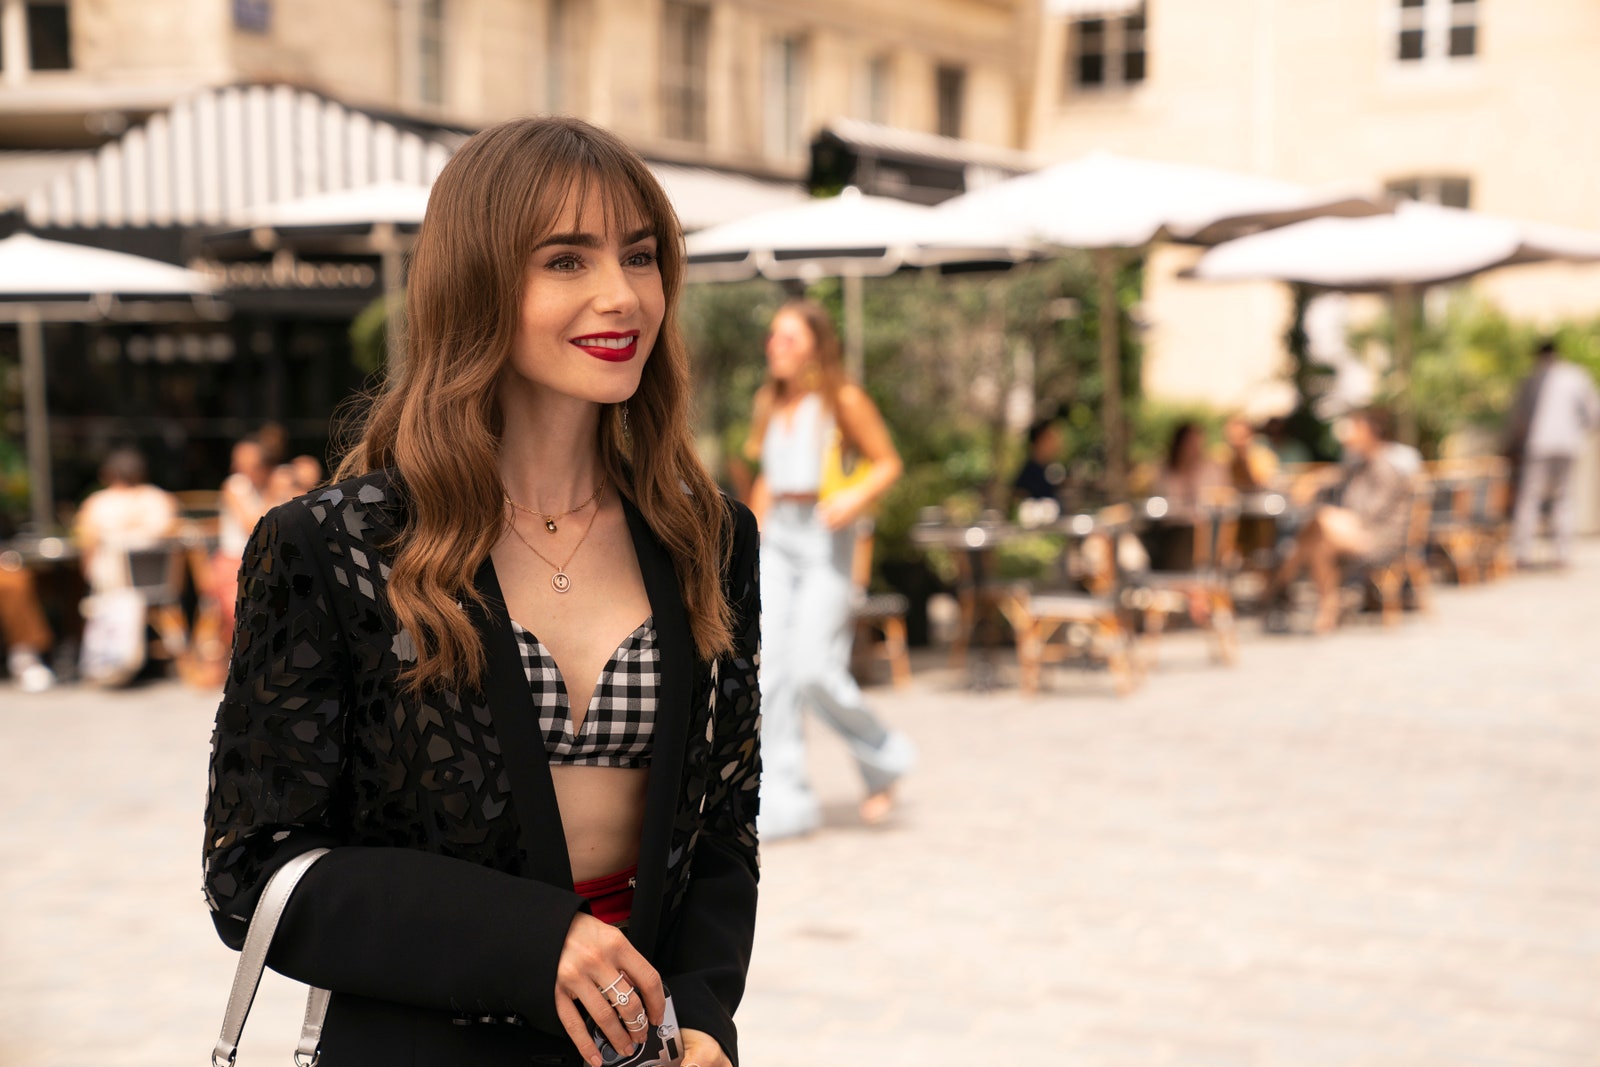 Emily in Paris Season 3 wearing a Barbara Bui Black blazer with a black and white gingham bandeau from Livy Studio in a outdoor Paris scene